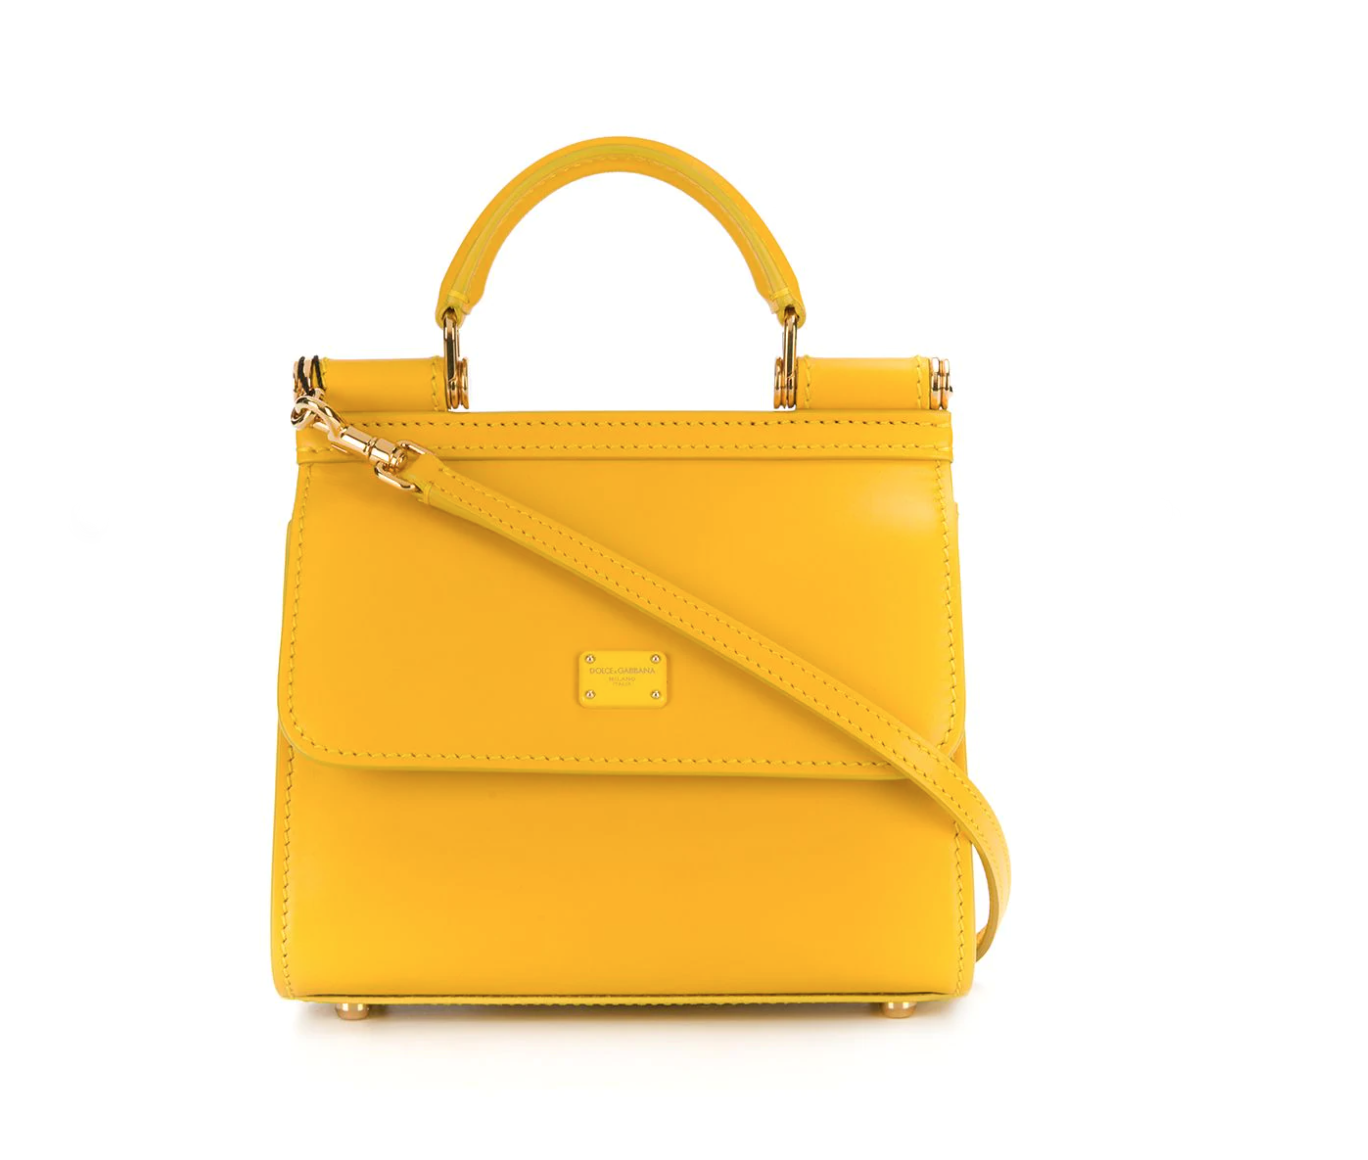 The Yellow Bag Trend—Add a Little Joy To Your Life – ALLIE NYC